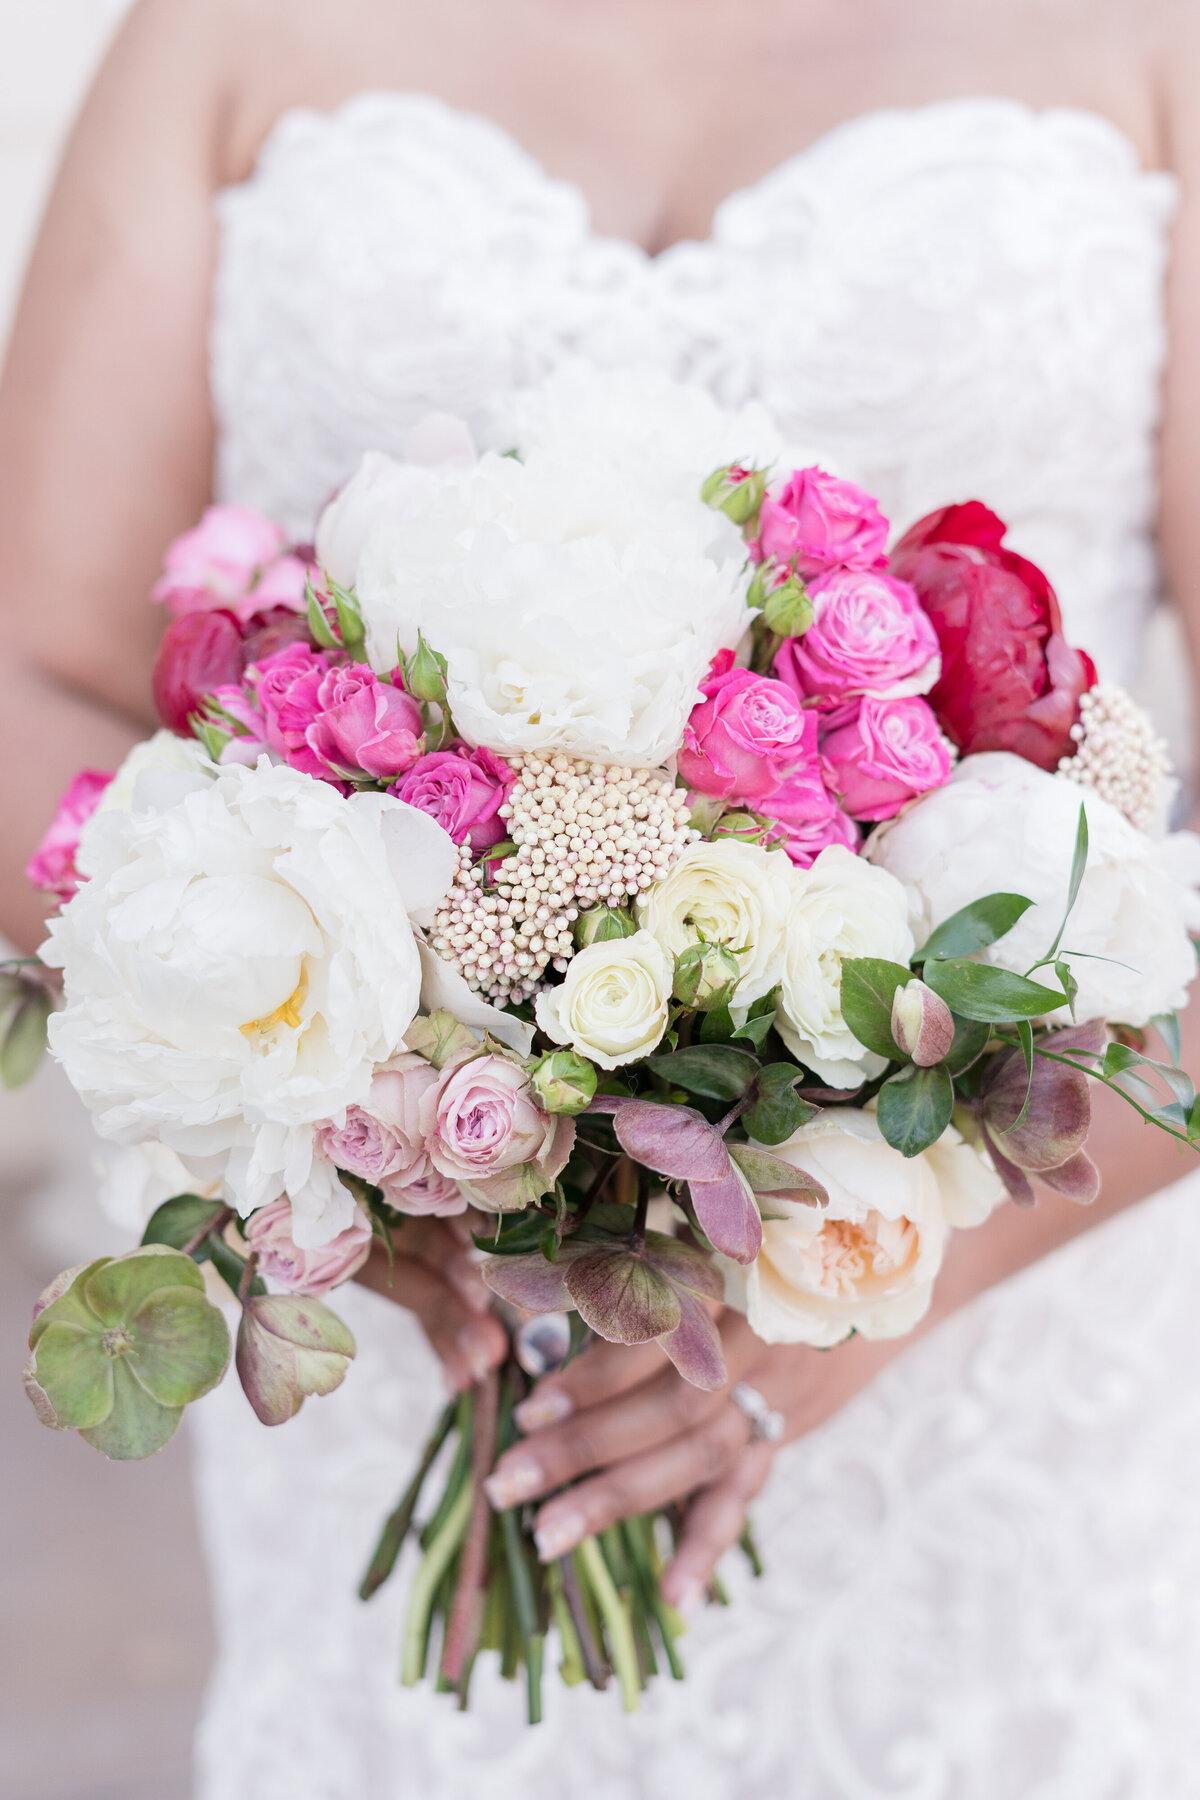 red, white, pink and cream bridal bouquet held by bride